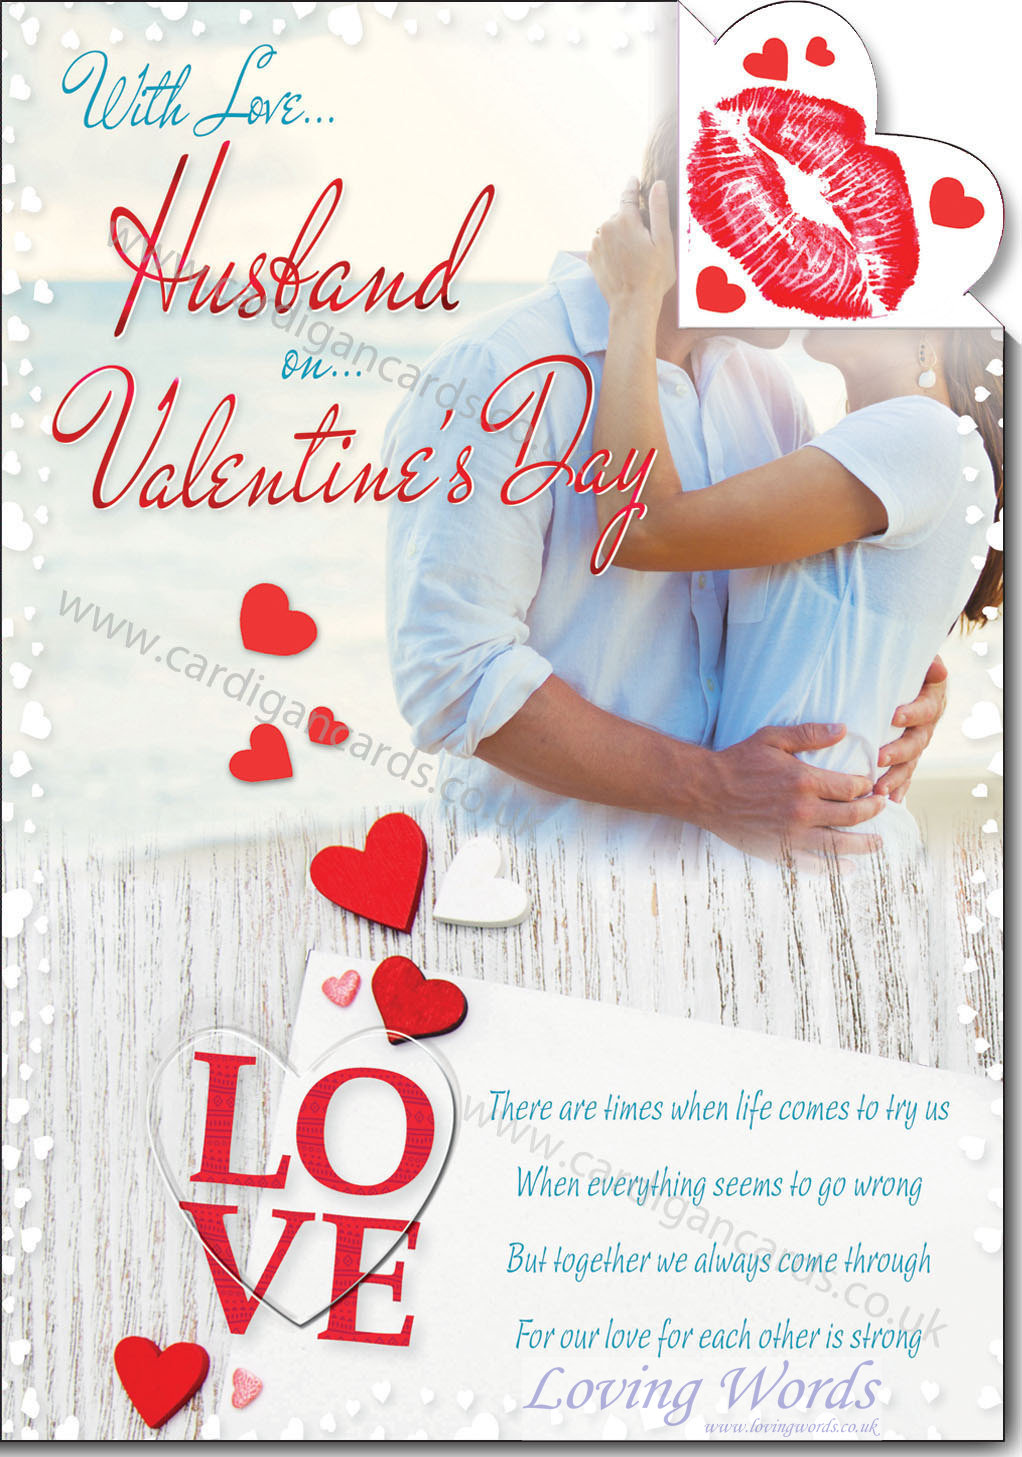 husband-on-valentine-s-day-greeting-cards-by-loving-words